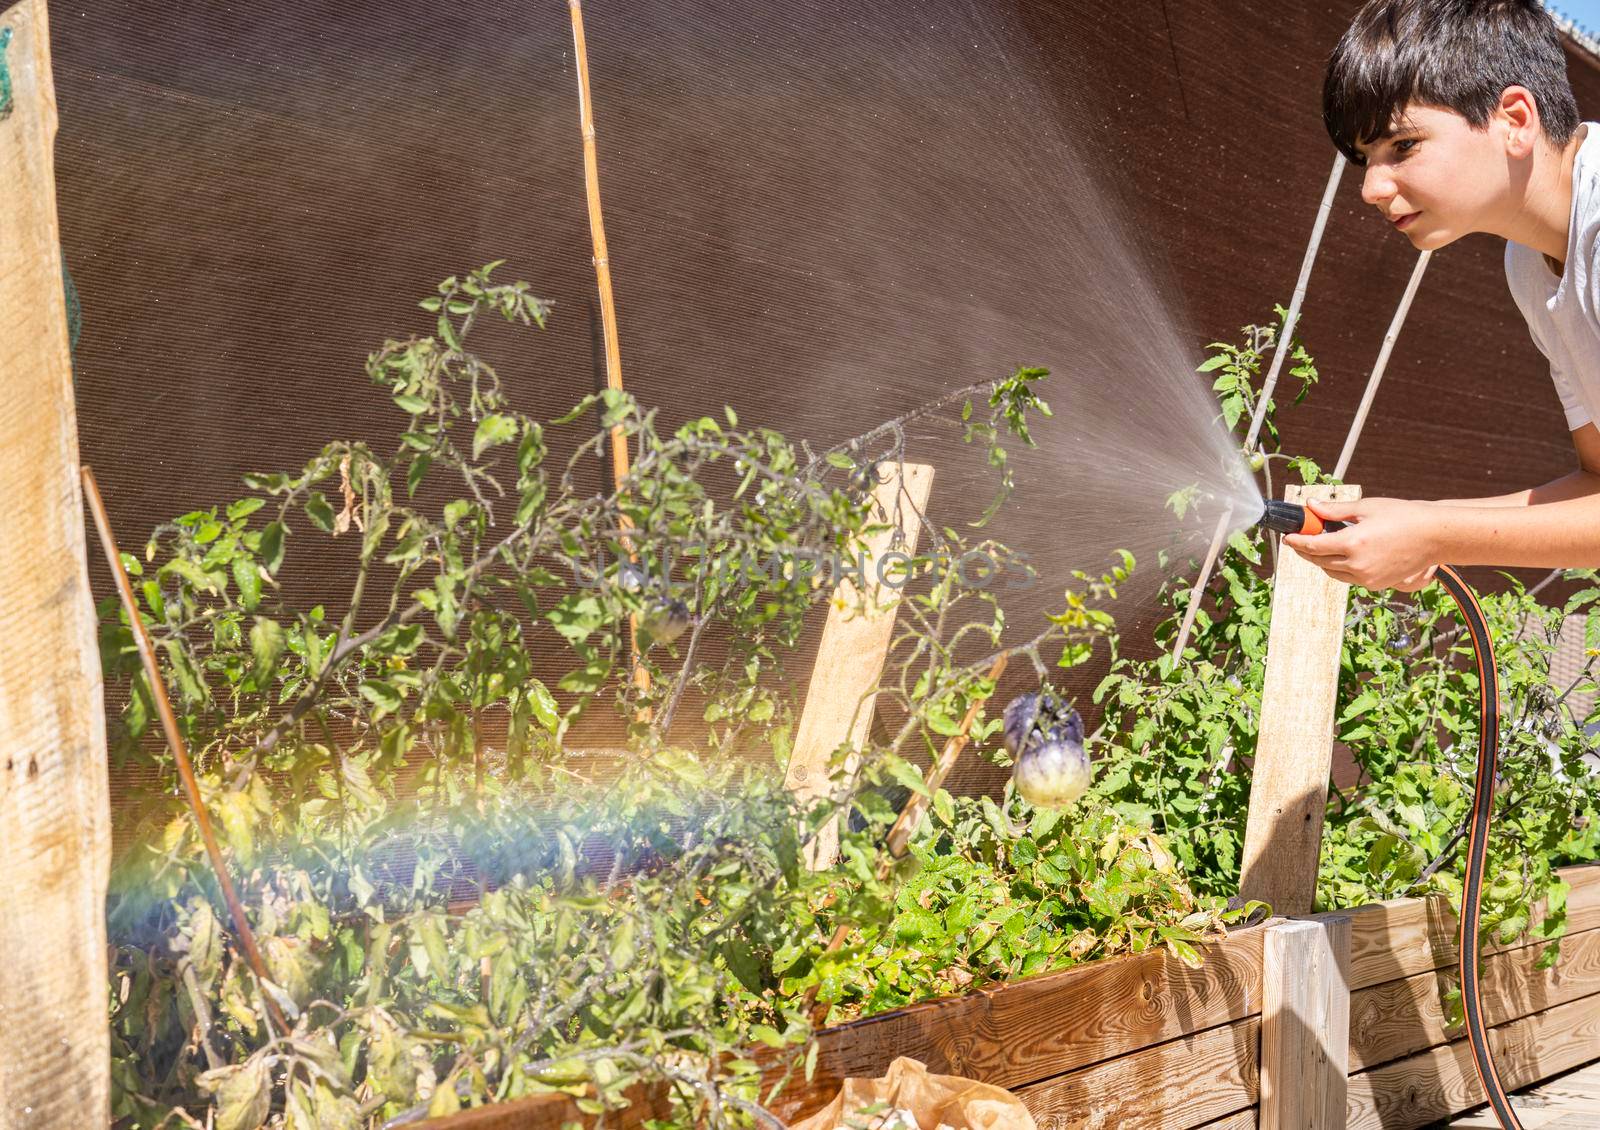 Boy watering the vegetable and tomatoes garden. Growth concept. Healthy lifestyle and sustainability.